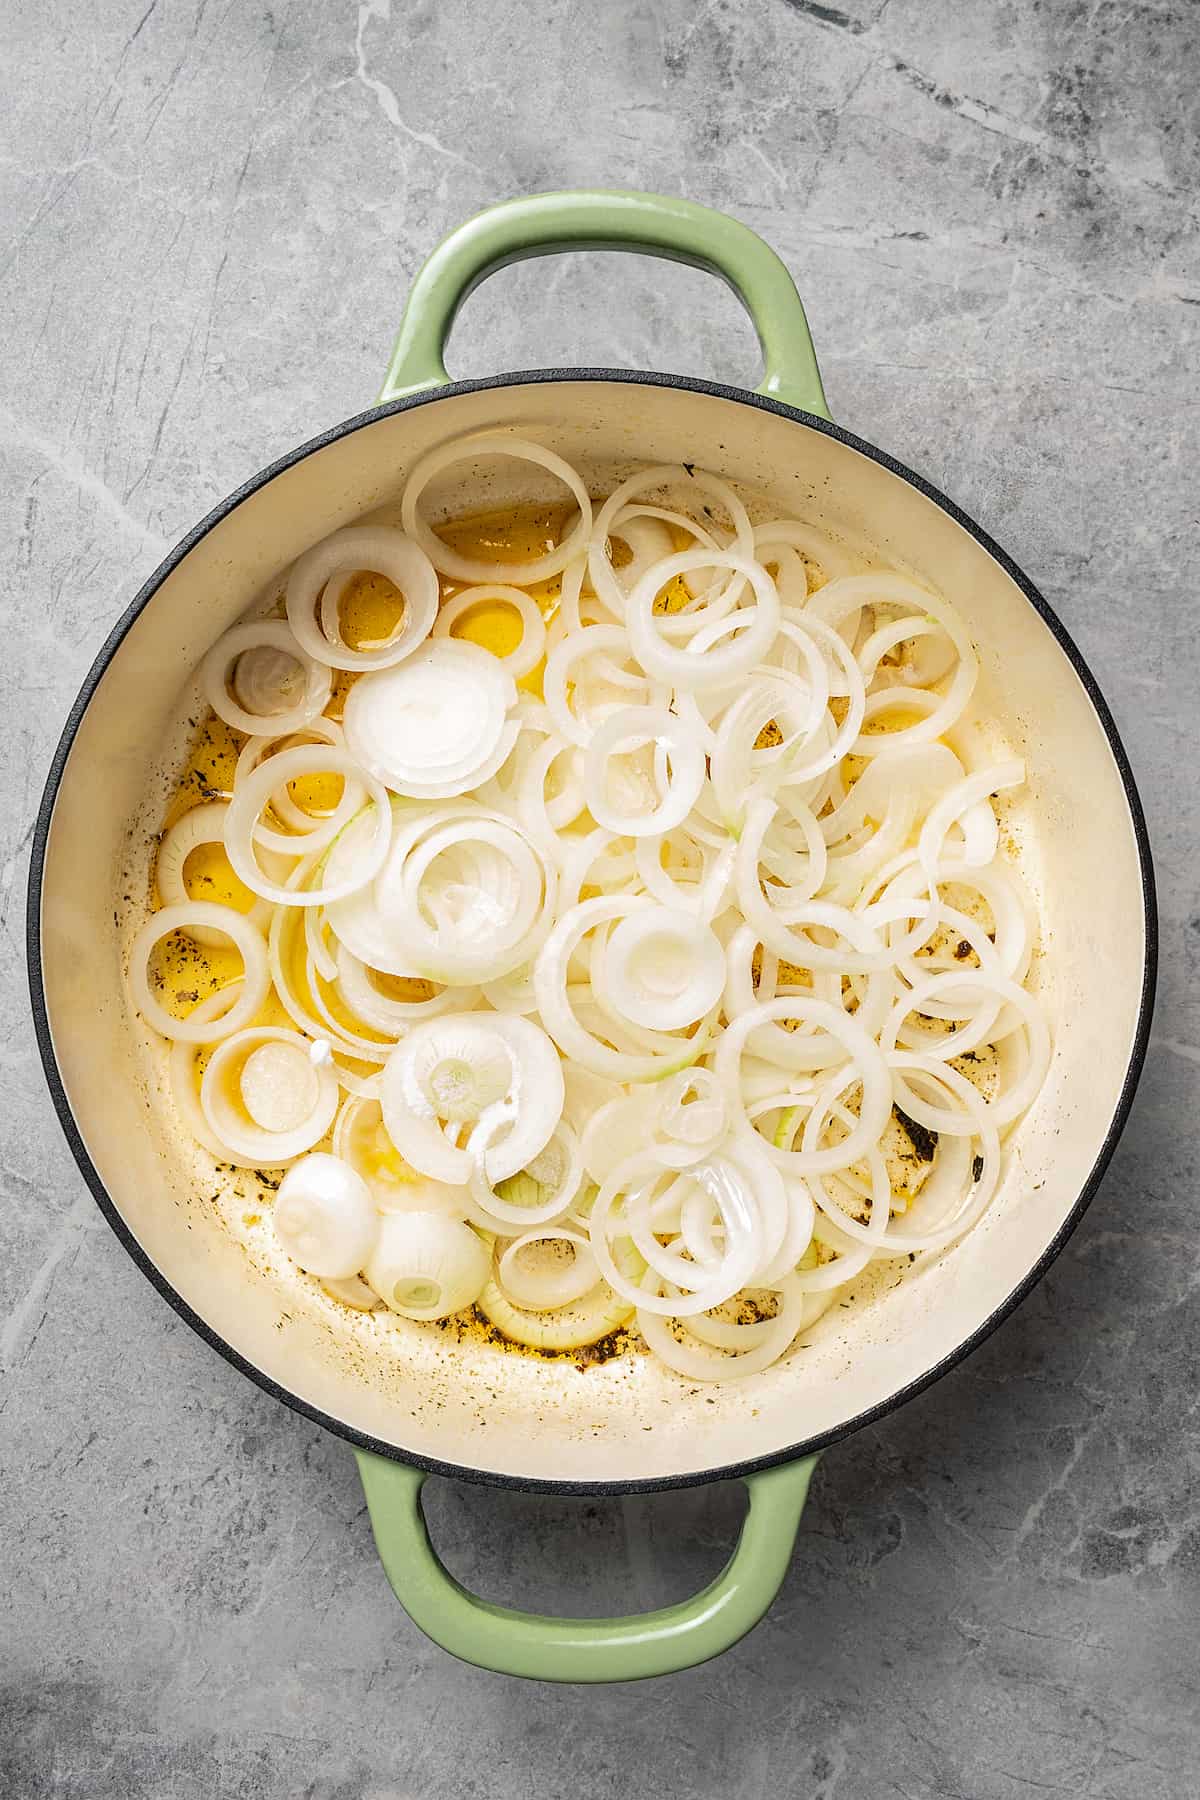 A pan full of sliced onions.